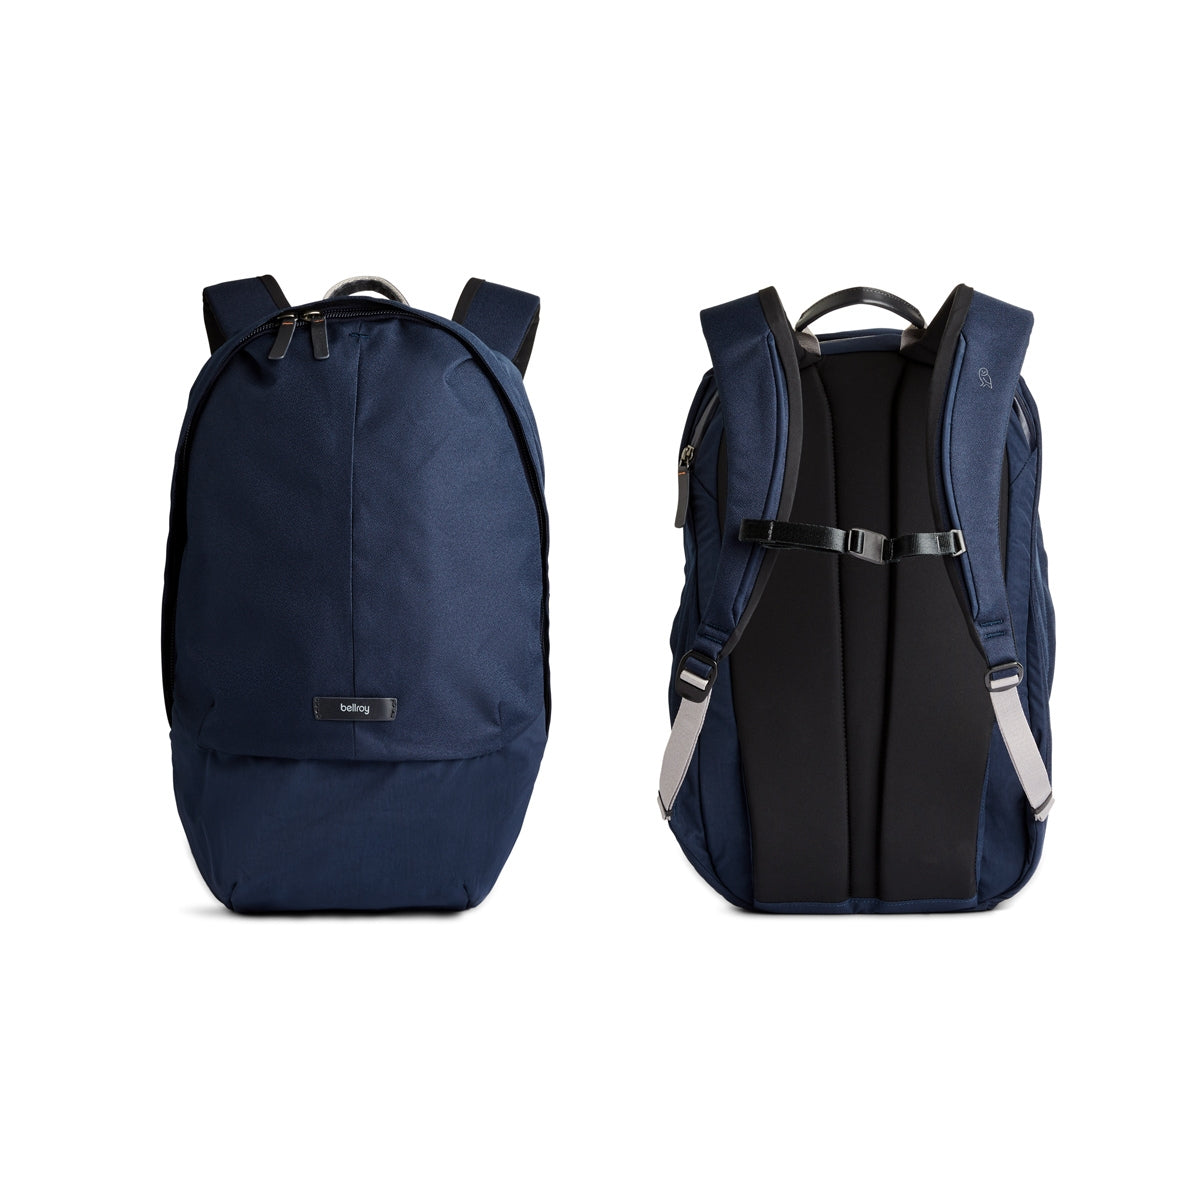 Bellroy Classic Backpack Plus in Navy